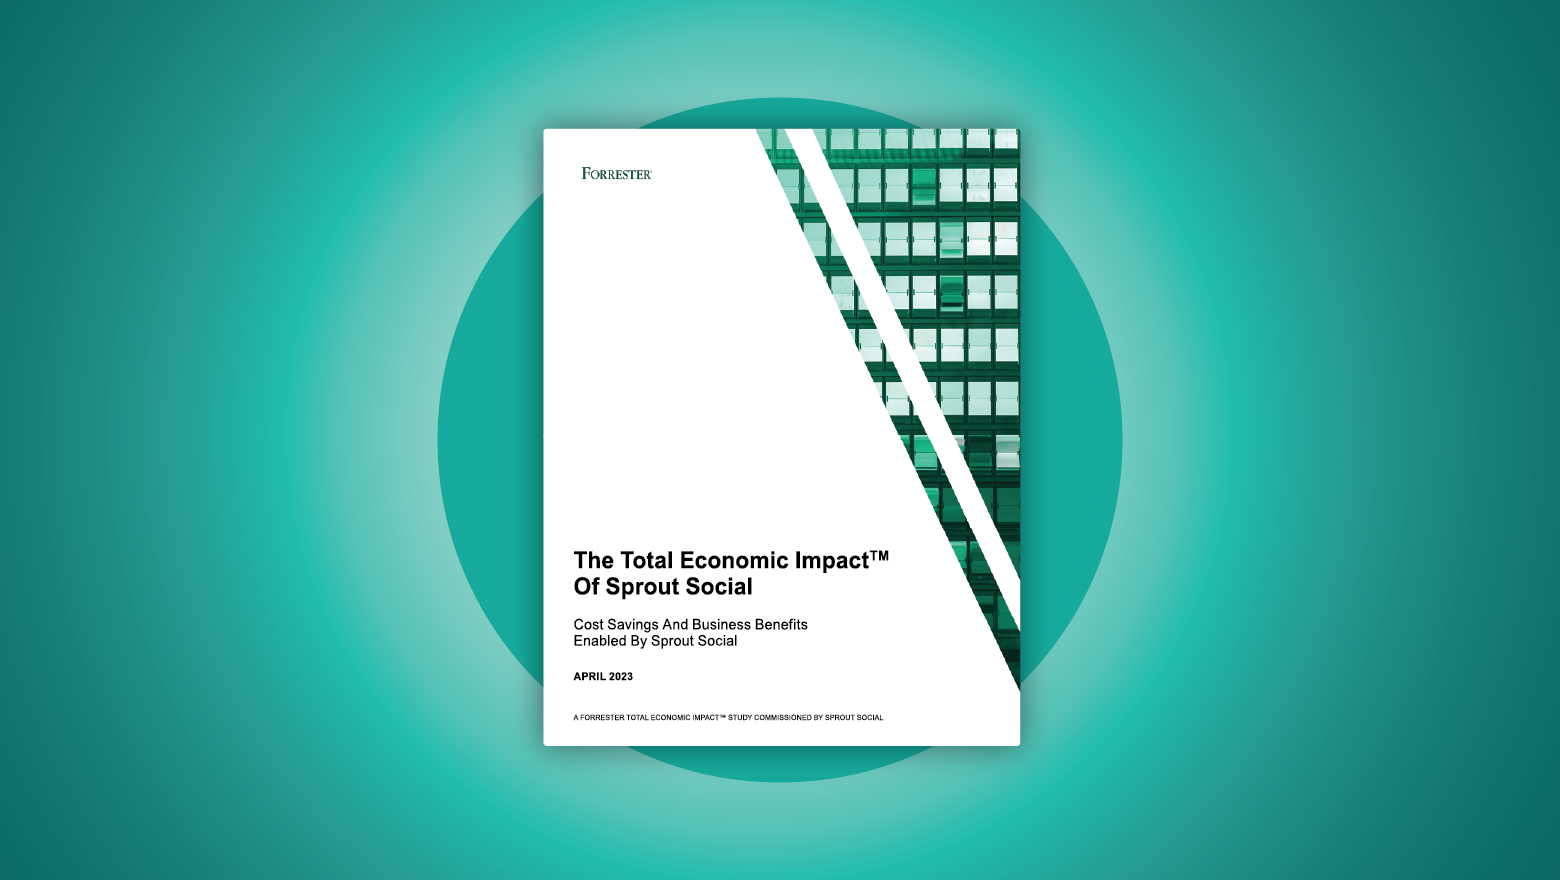 Forrester Study: The Total Economic Impact™ of Sprout Social